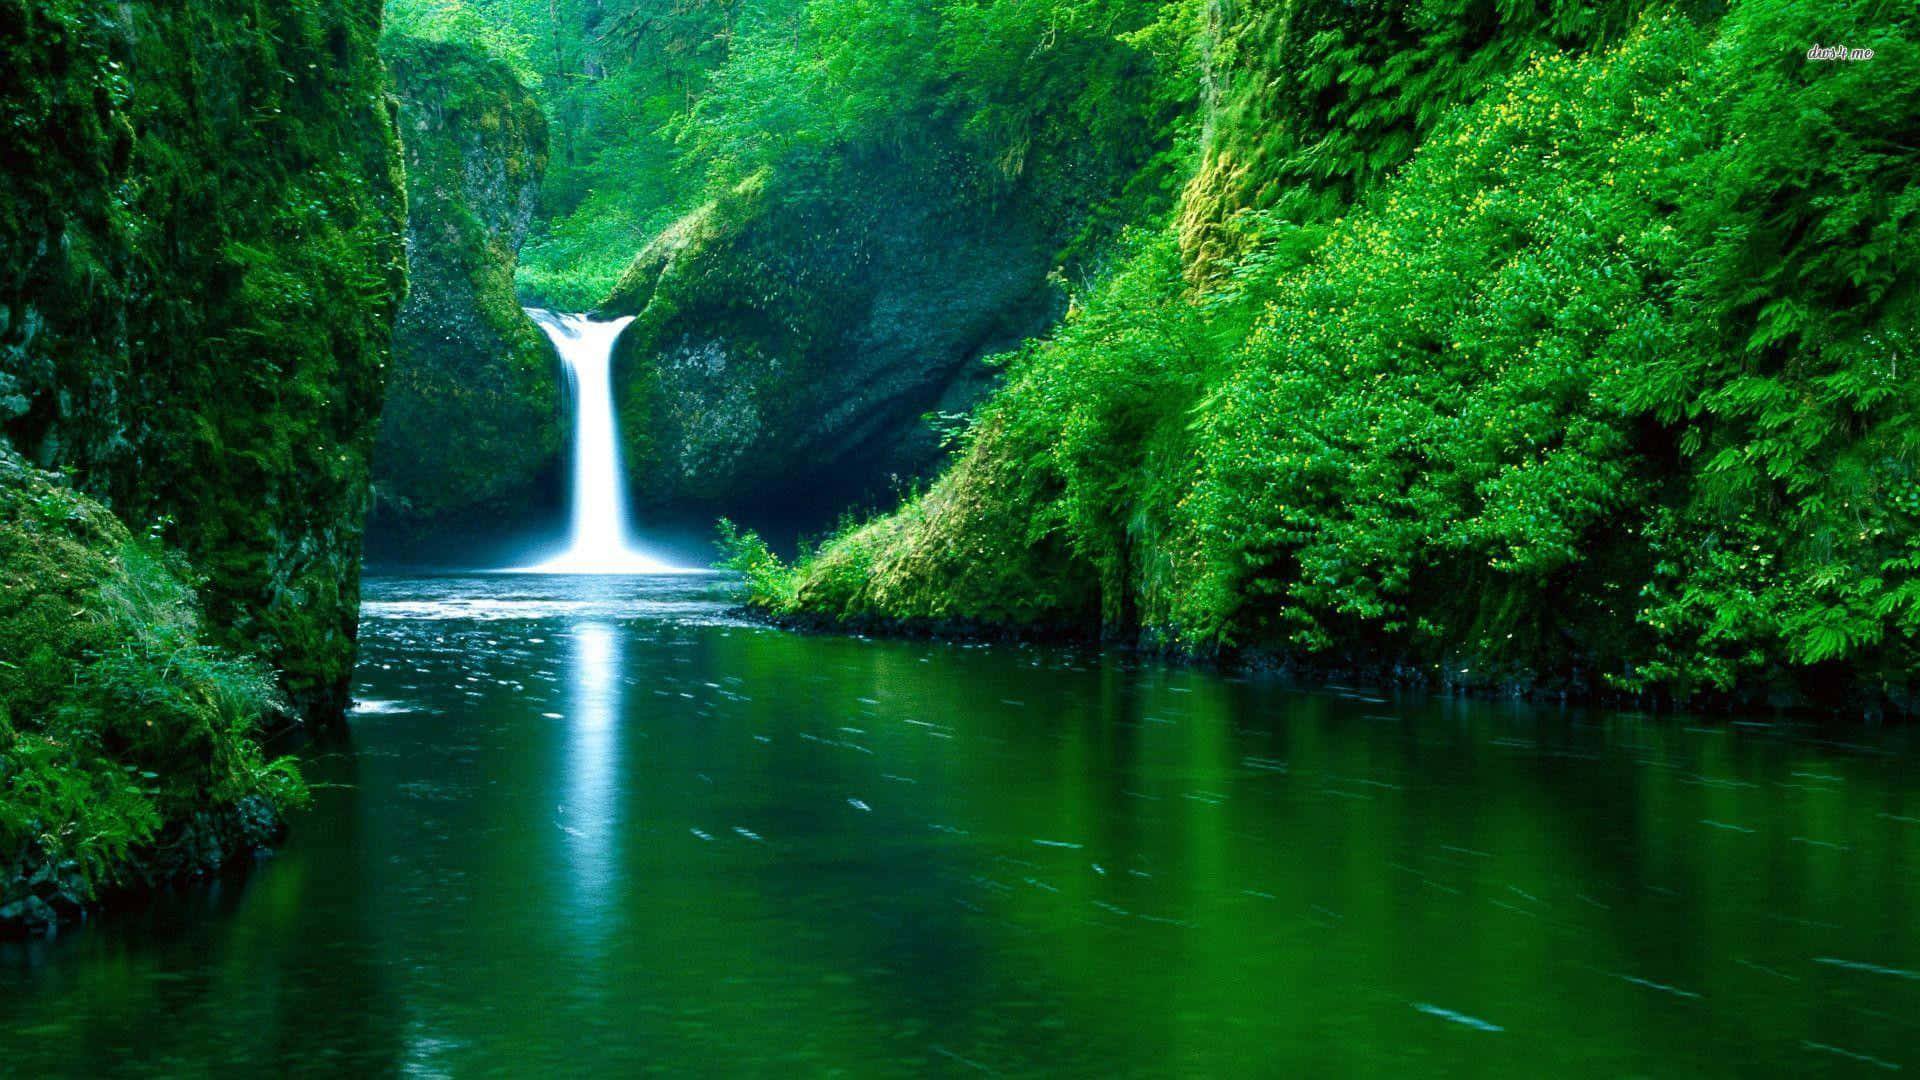 Image  "Spectacular Waterfalls In The Jungles Of Costa Rica" Wallpaper